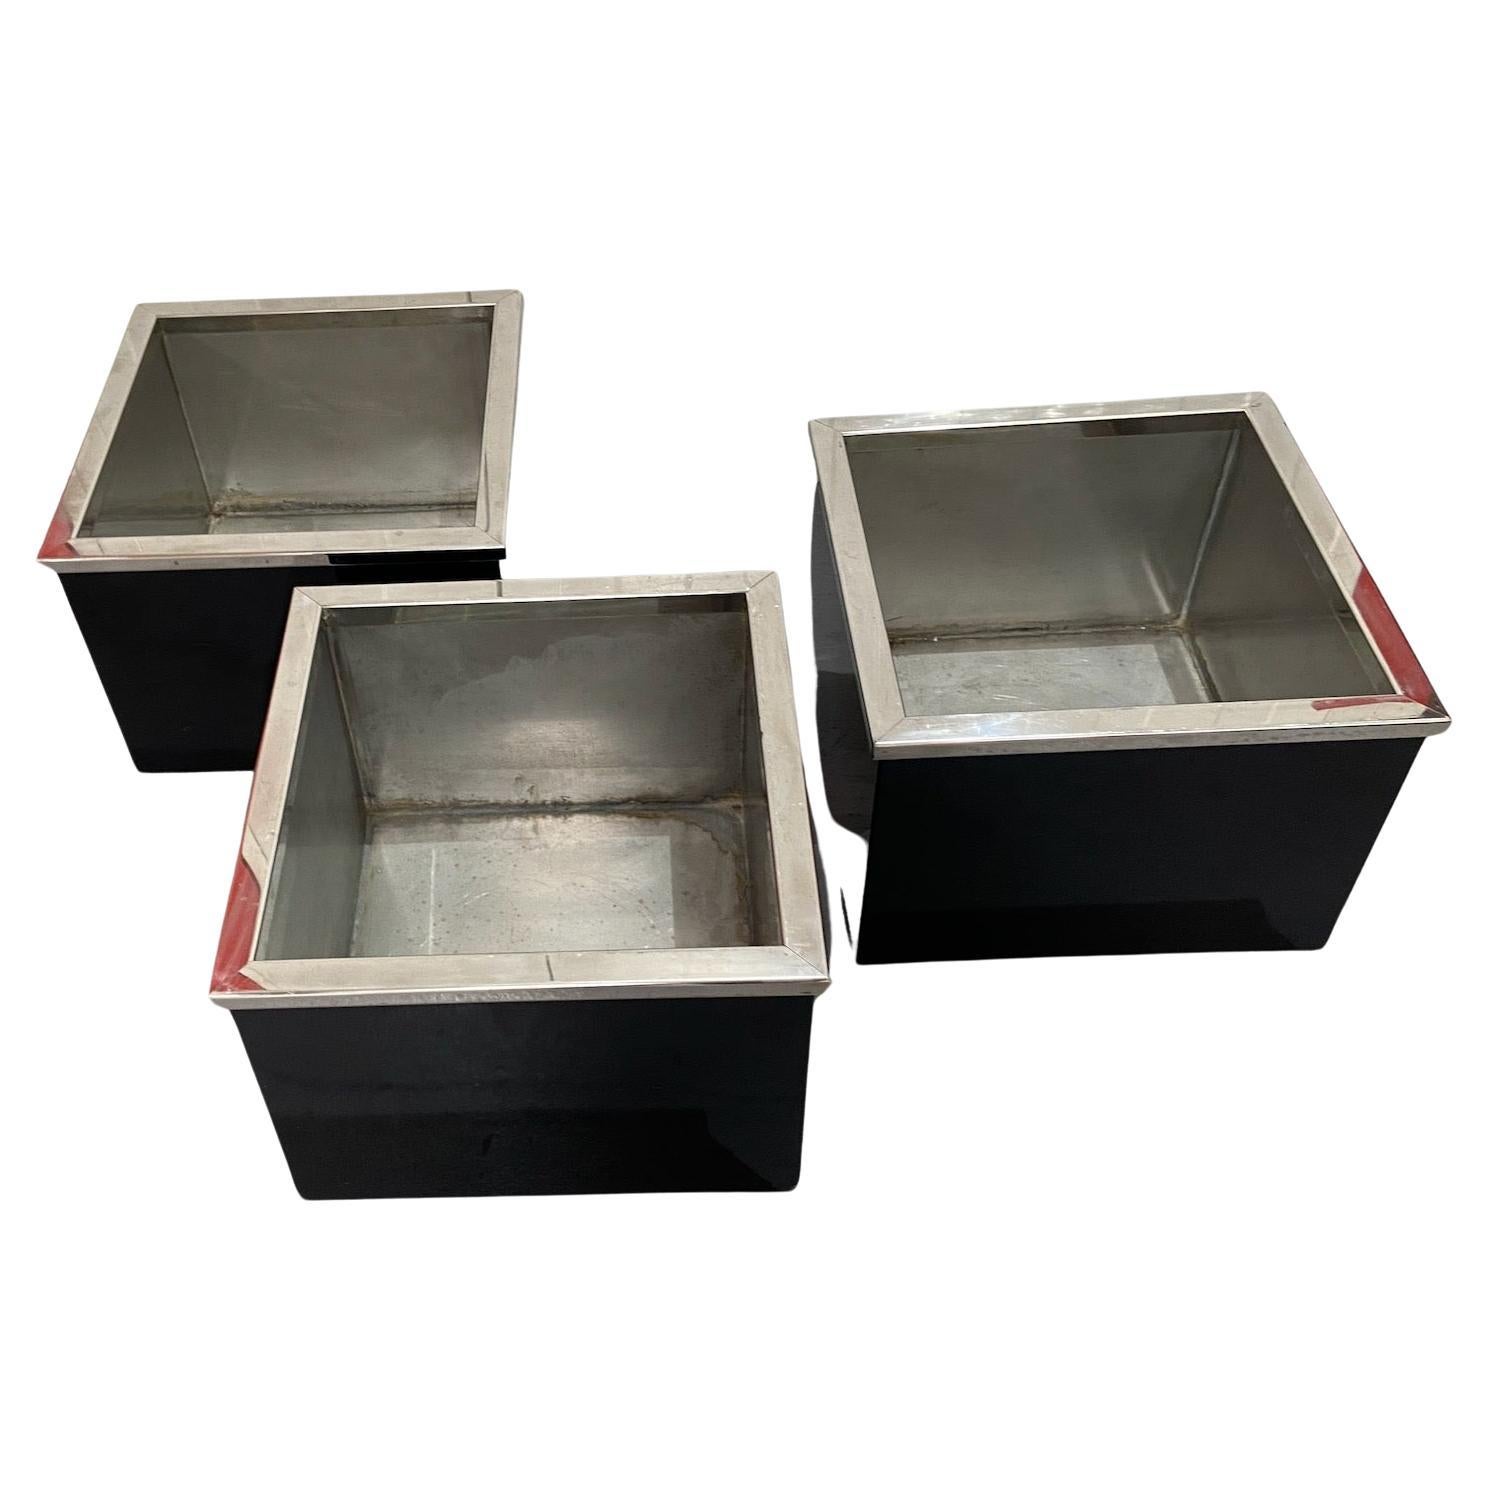 1960s-70s black enamel and chrome metal cubic planters, manner of Willy Rizzo In Good Condition For Sale In London, GB